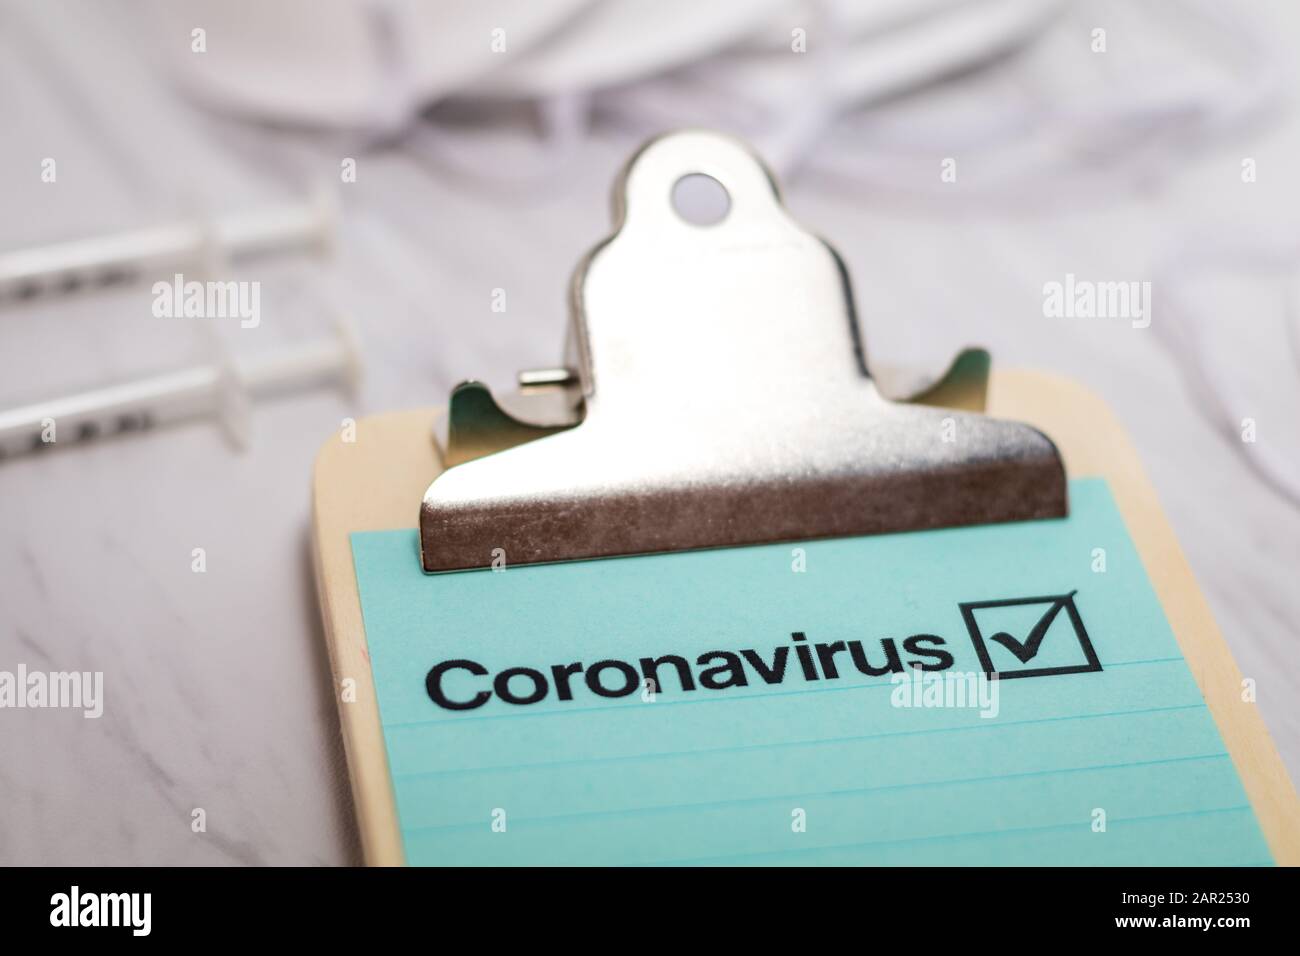 Coronavirus 2019-nCOV medical still life concept on clipboard with mask and needles Stock Photo